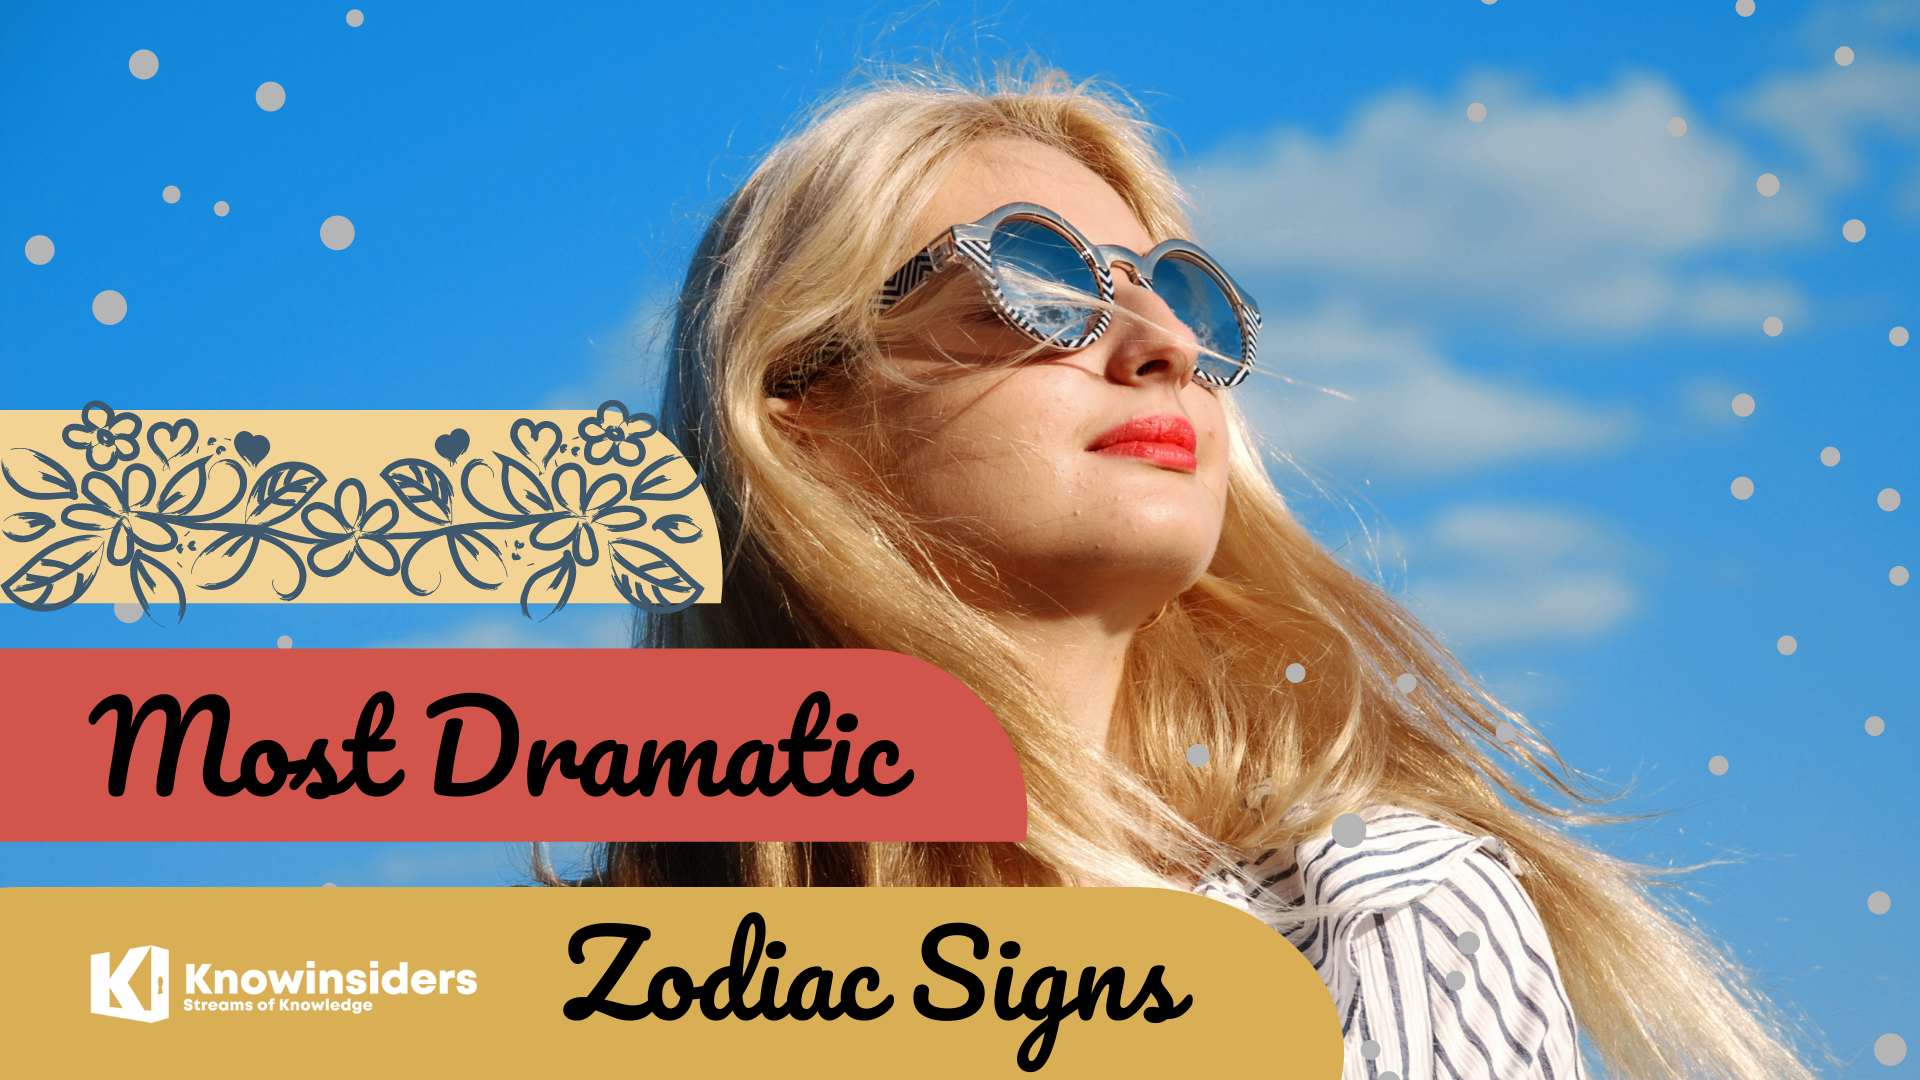 Top 5 Most Dramatic Zodiac Signs According To Astrology